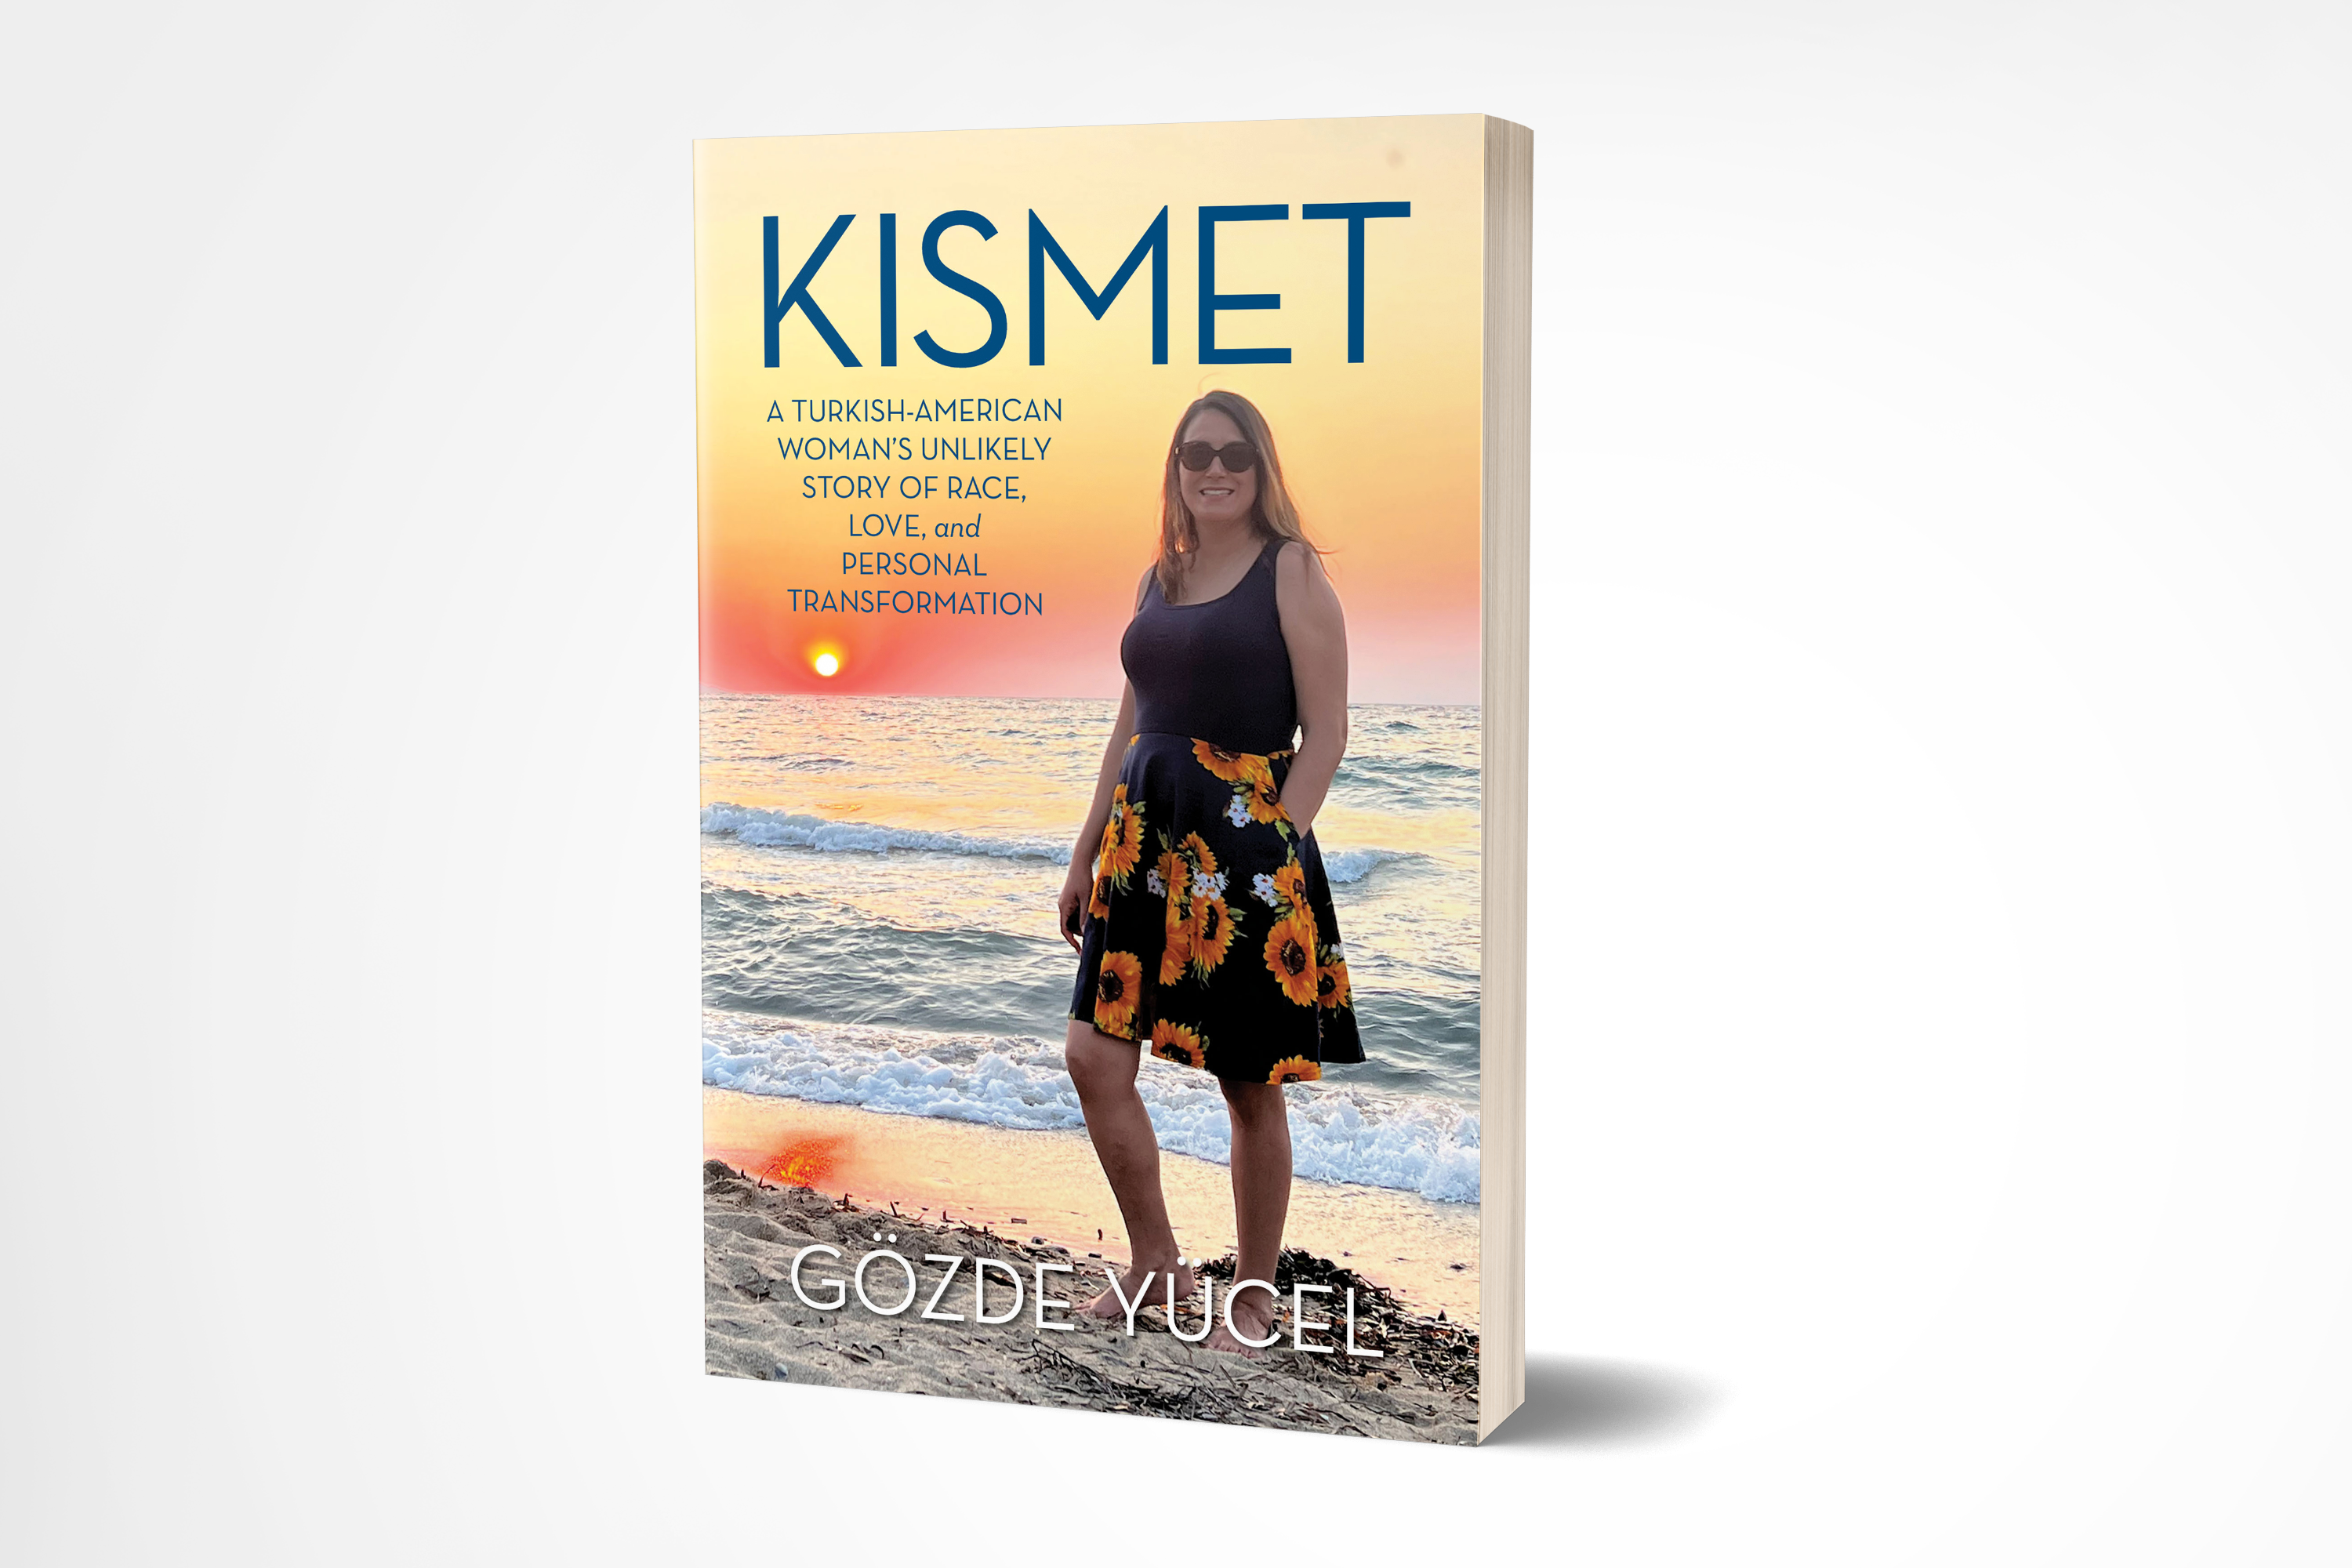 Kismet: A Turkish-American Woman's Unlikely Story of Race, Love, and Personal Transformation